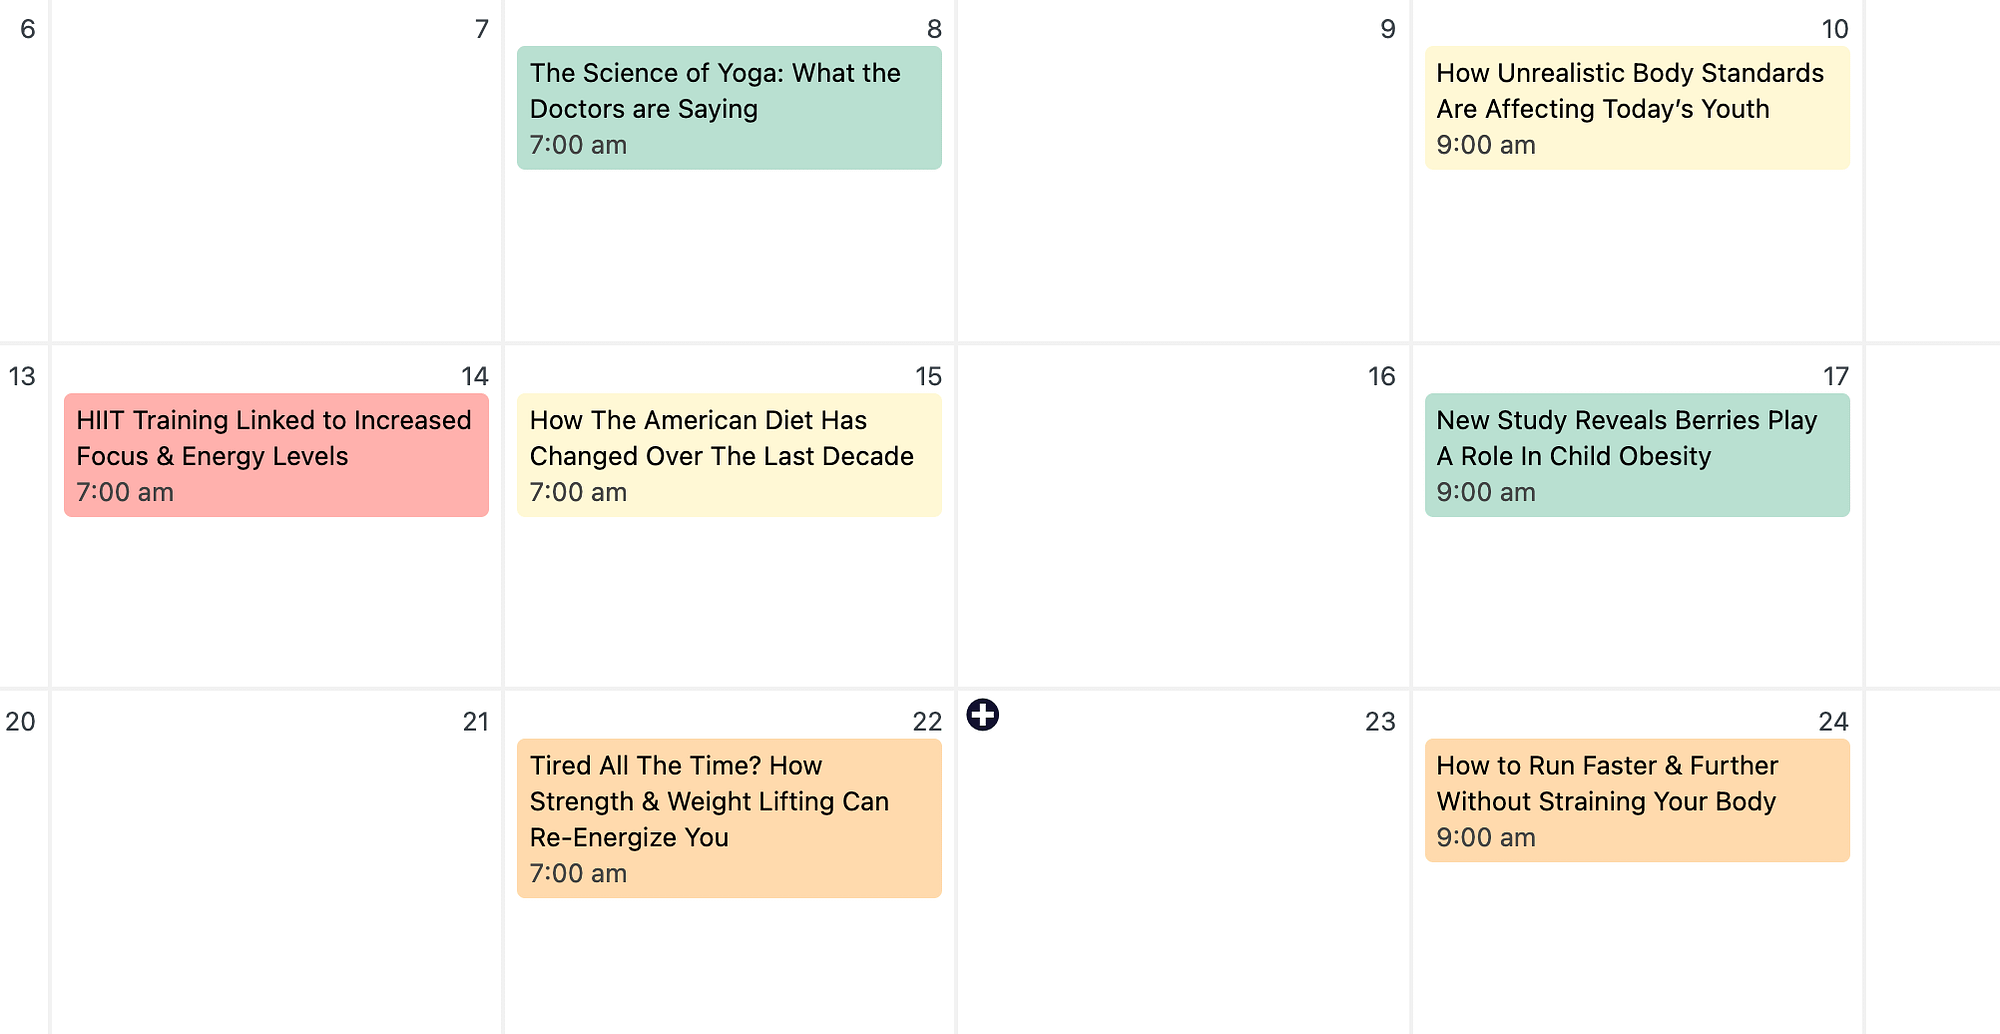 Posts in the calendar with different statuses